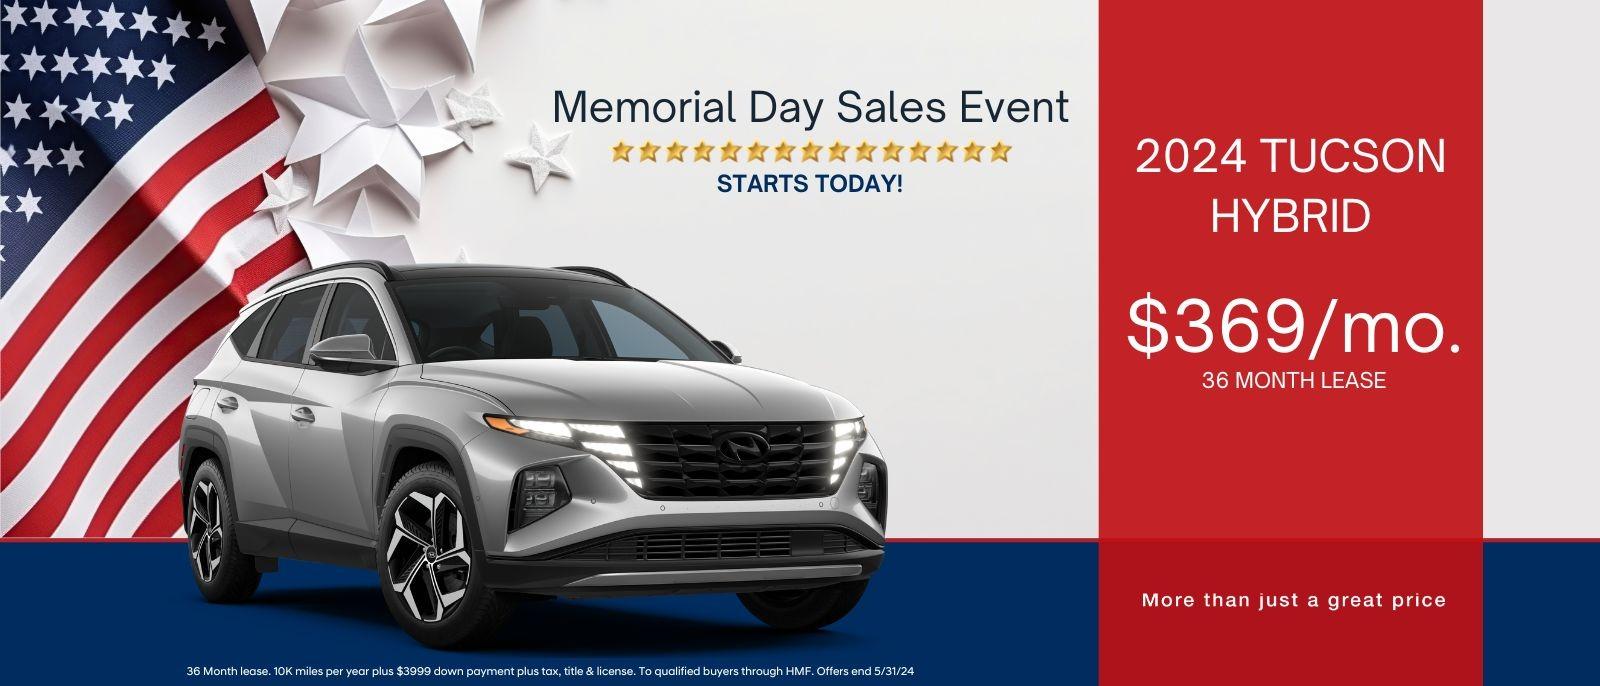 Memorial Day Sales Event Starts Today!
2024 Tucson Hybrid
$369/mo 36 month lease 
More than just a great price